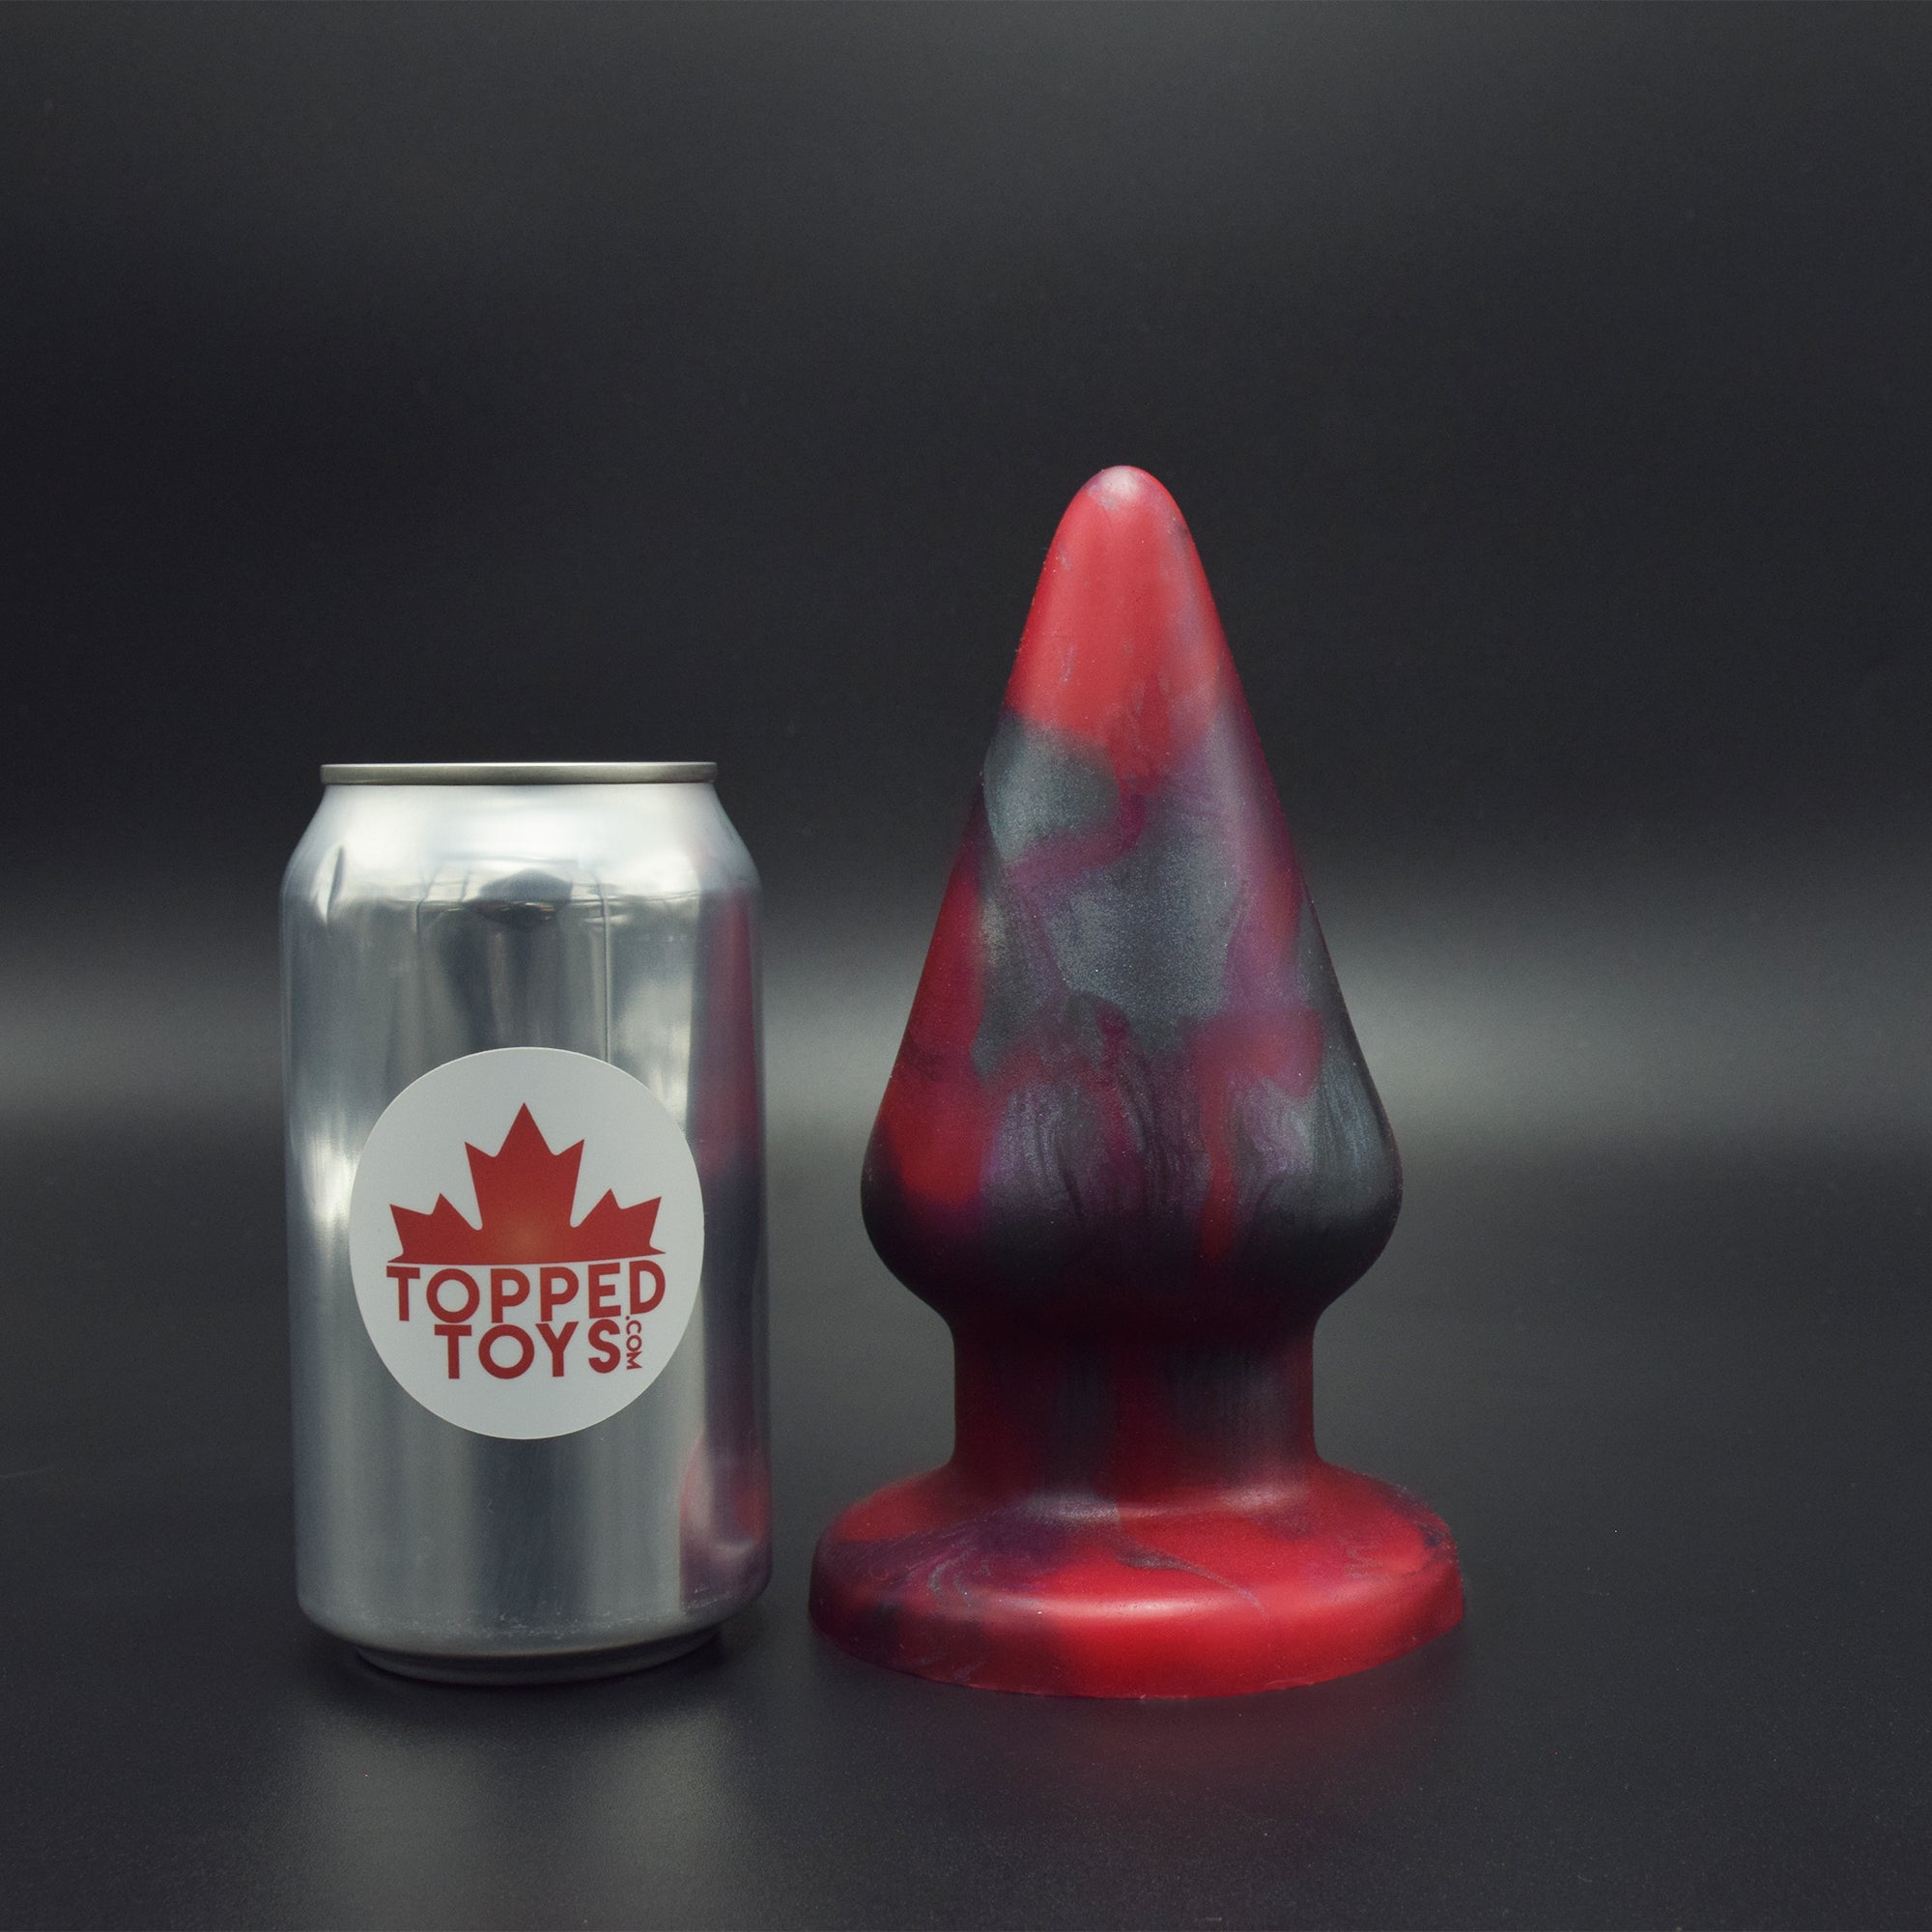 Grip 96 in Forge Red, next to pop can with Topped Toys logo